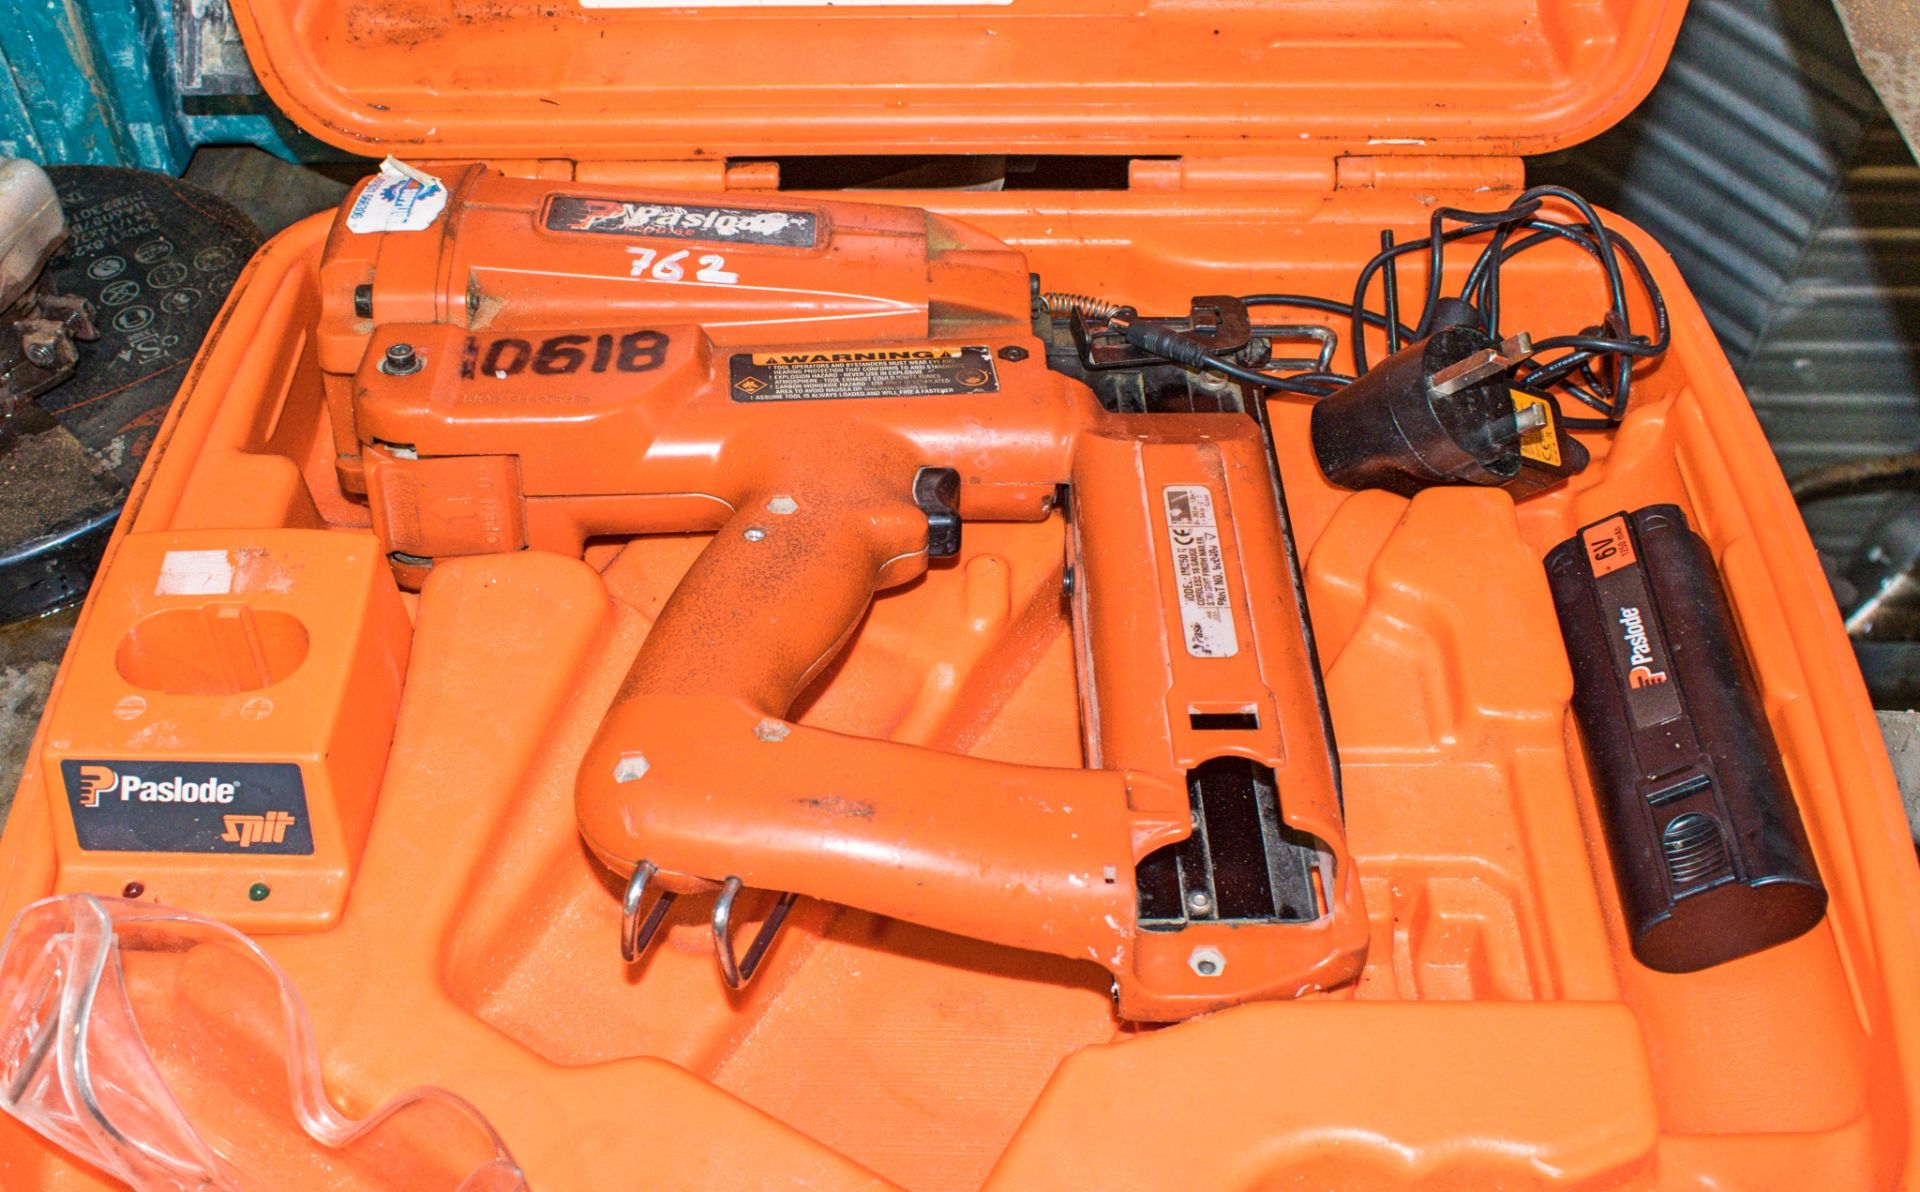 Paslode nail gun c/w battery, charger & carry case HS 10618